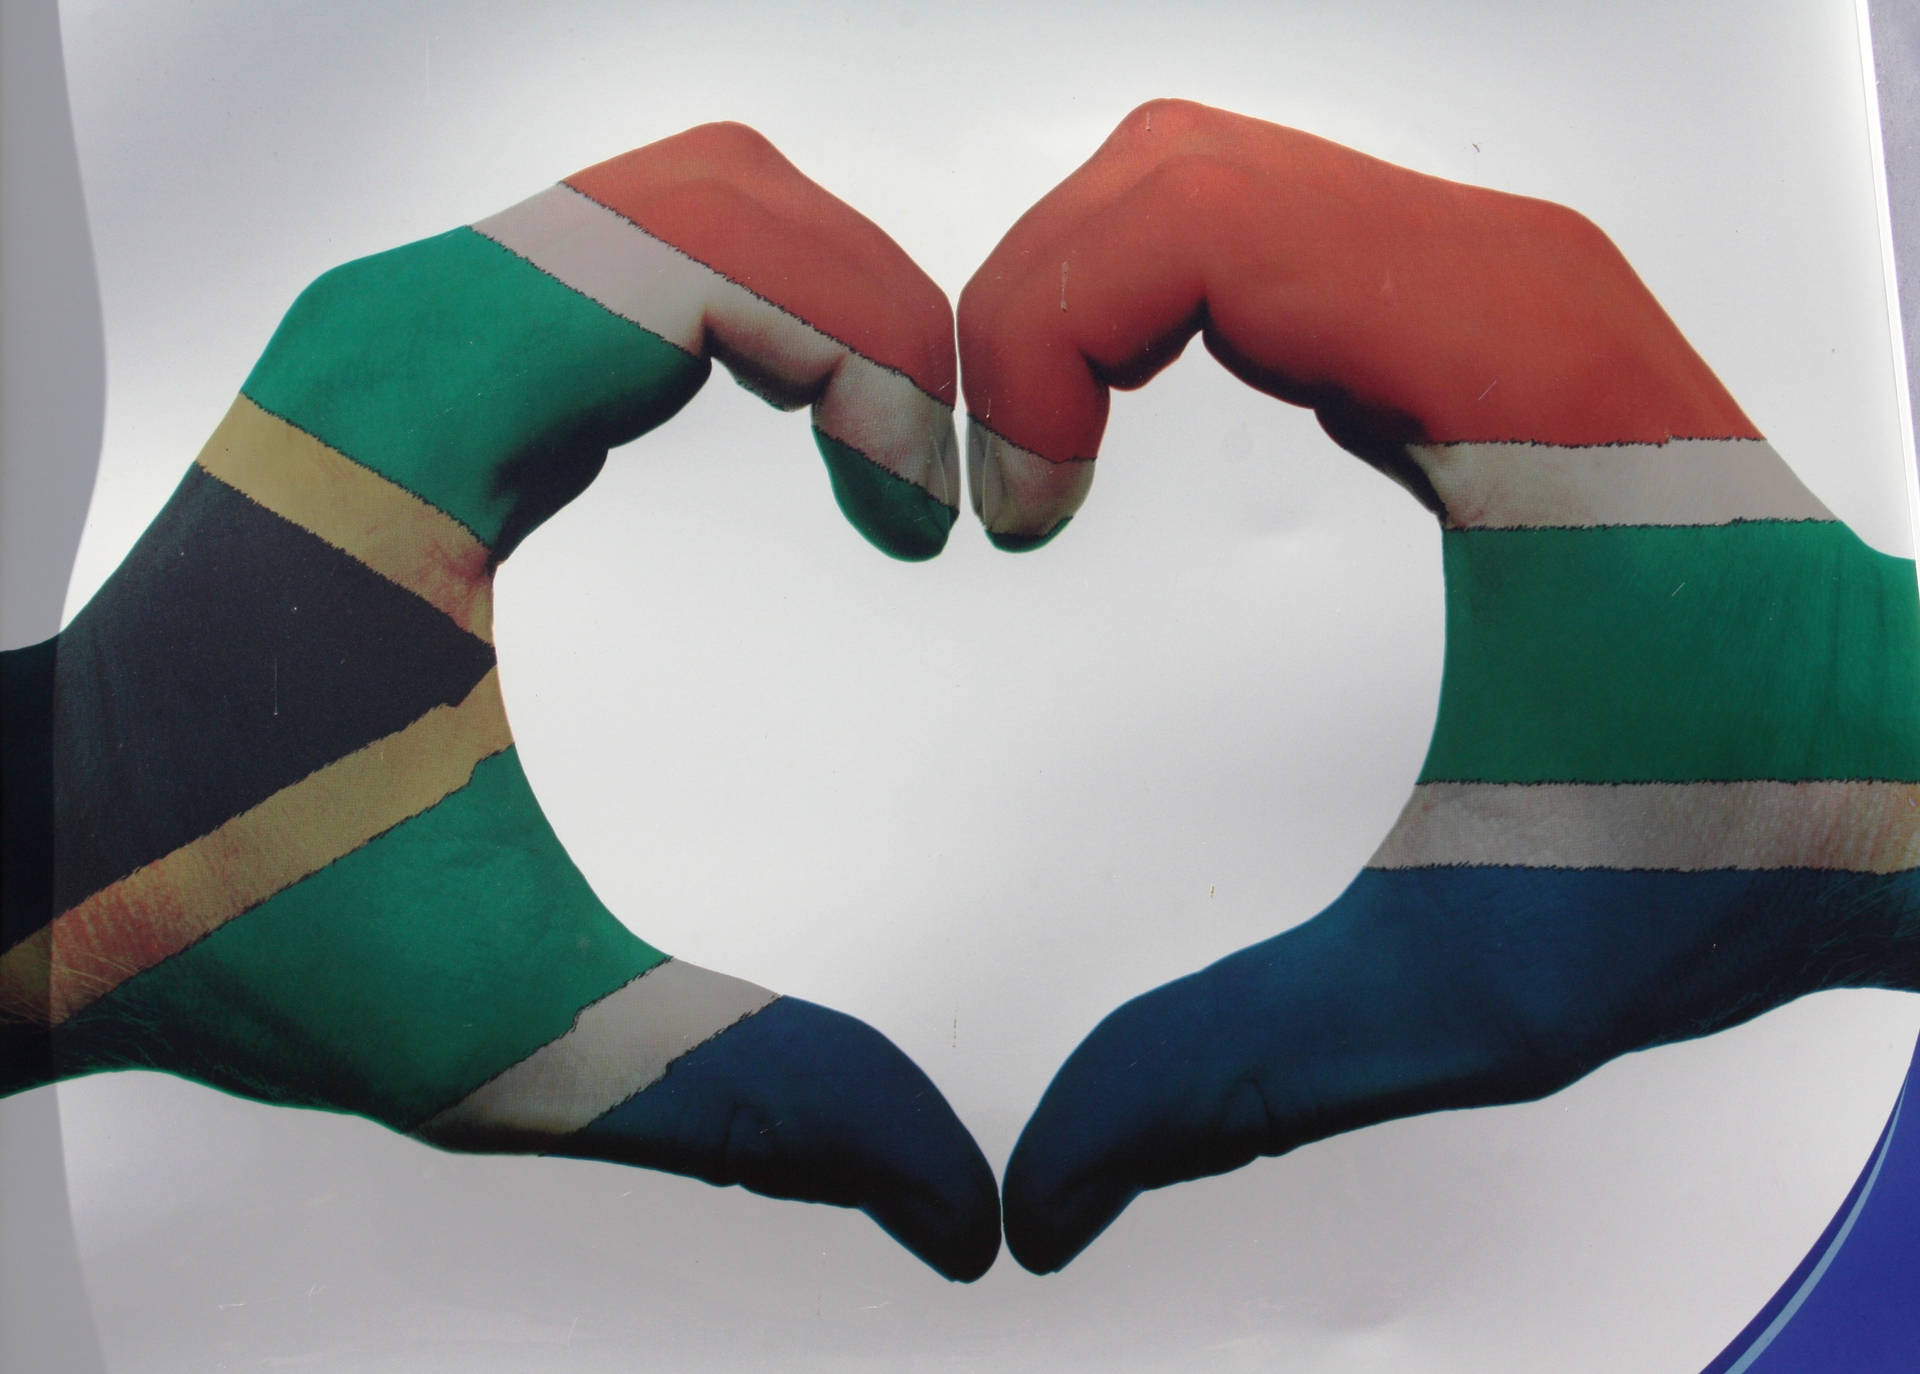 Expressing Love Through Hand Heart Shape Against South African Landscape Background